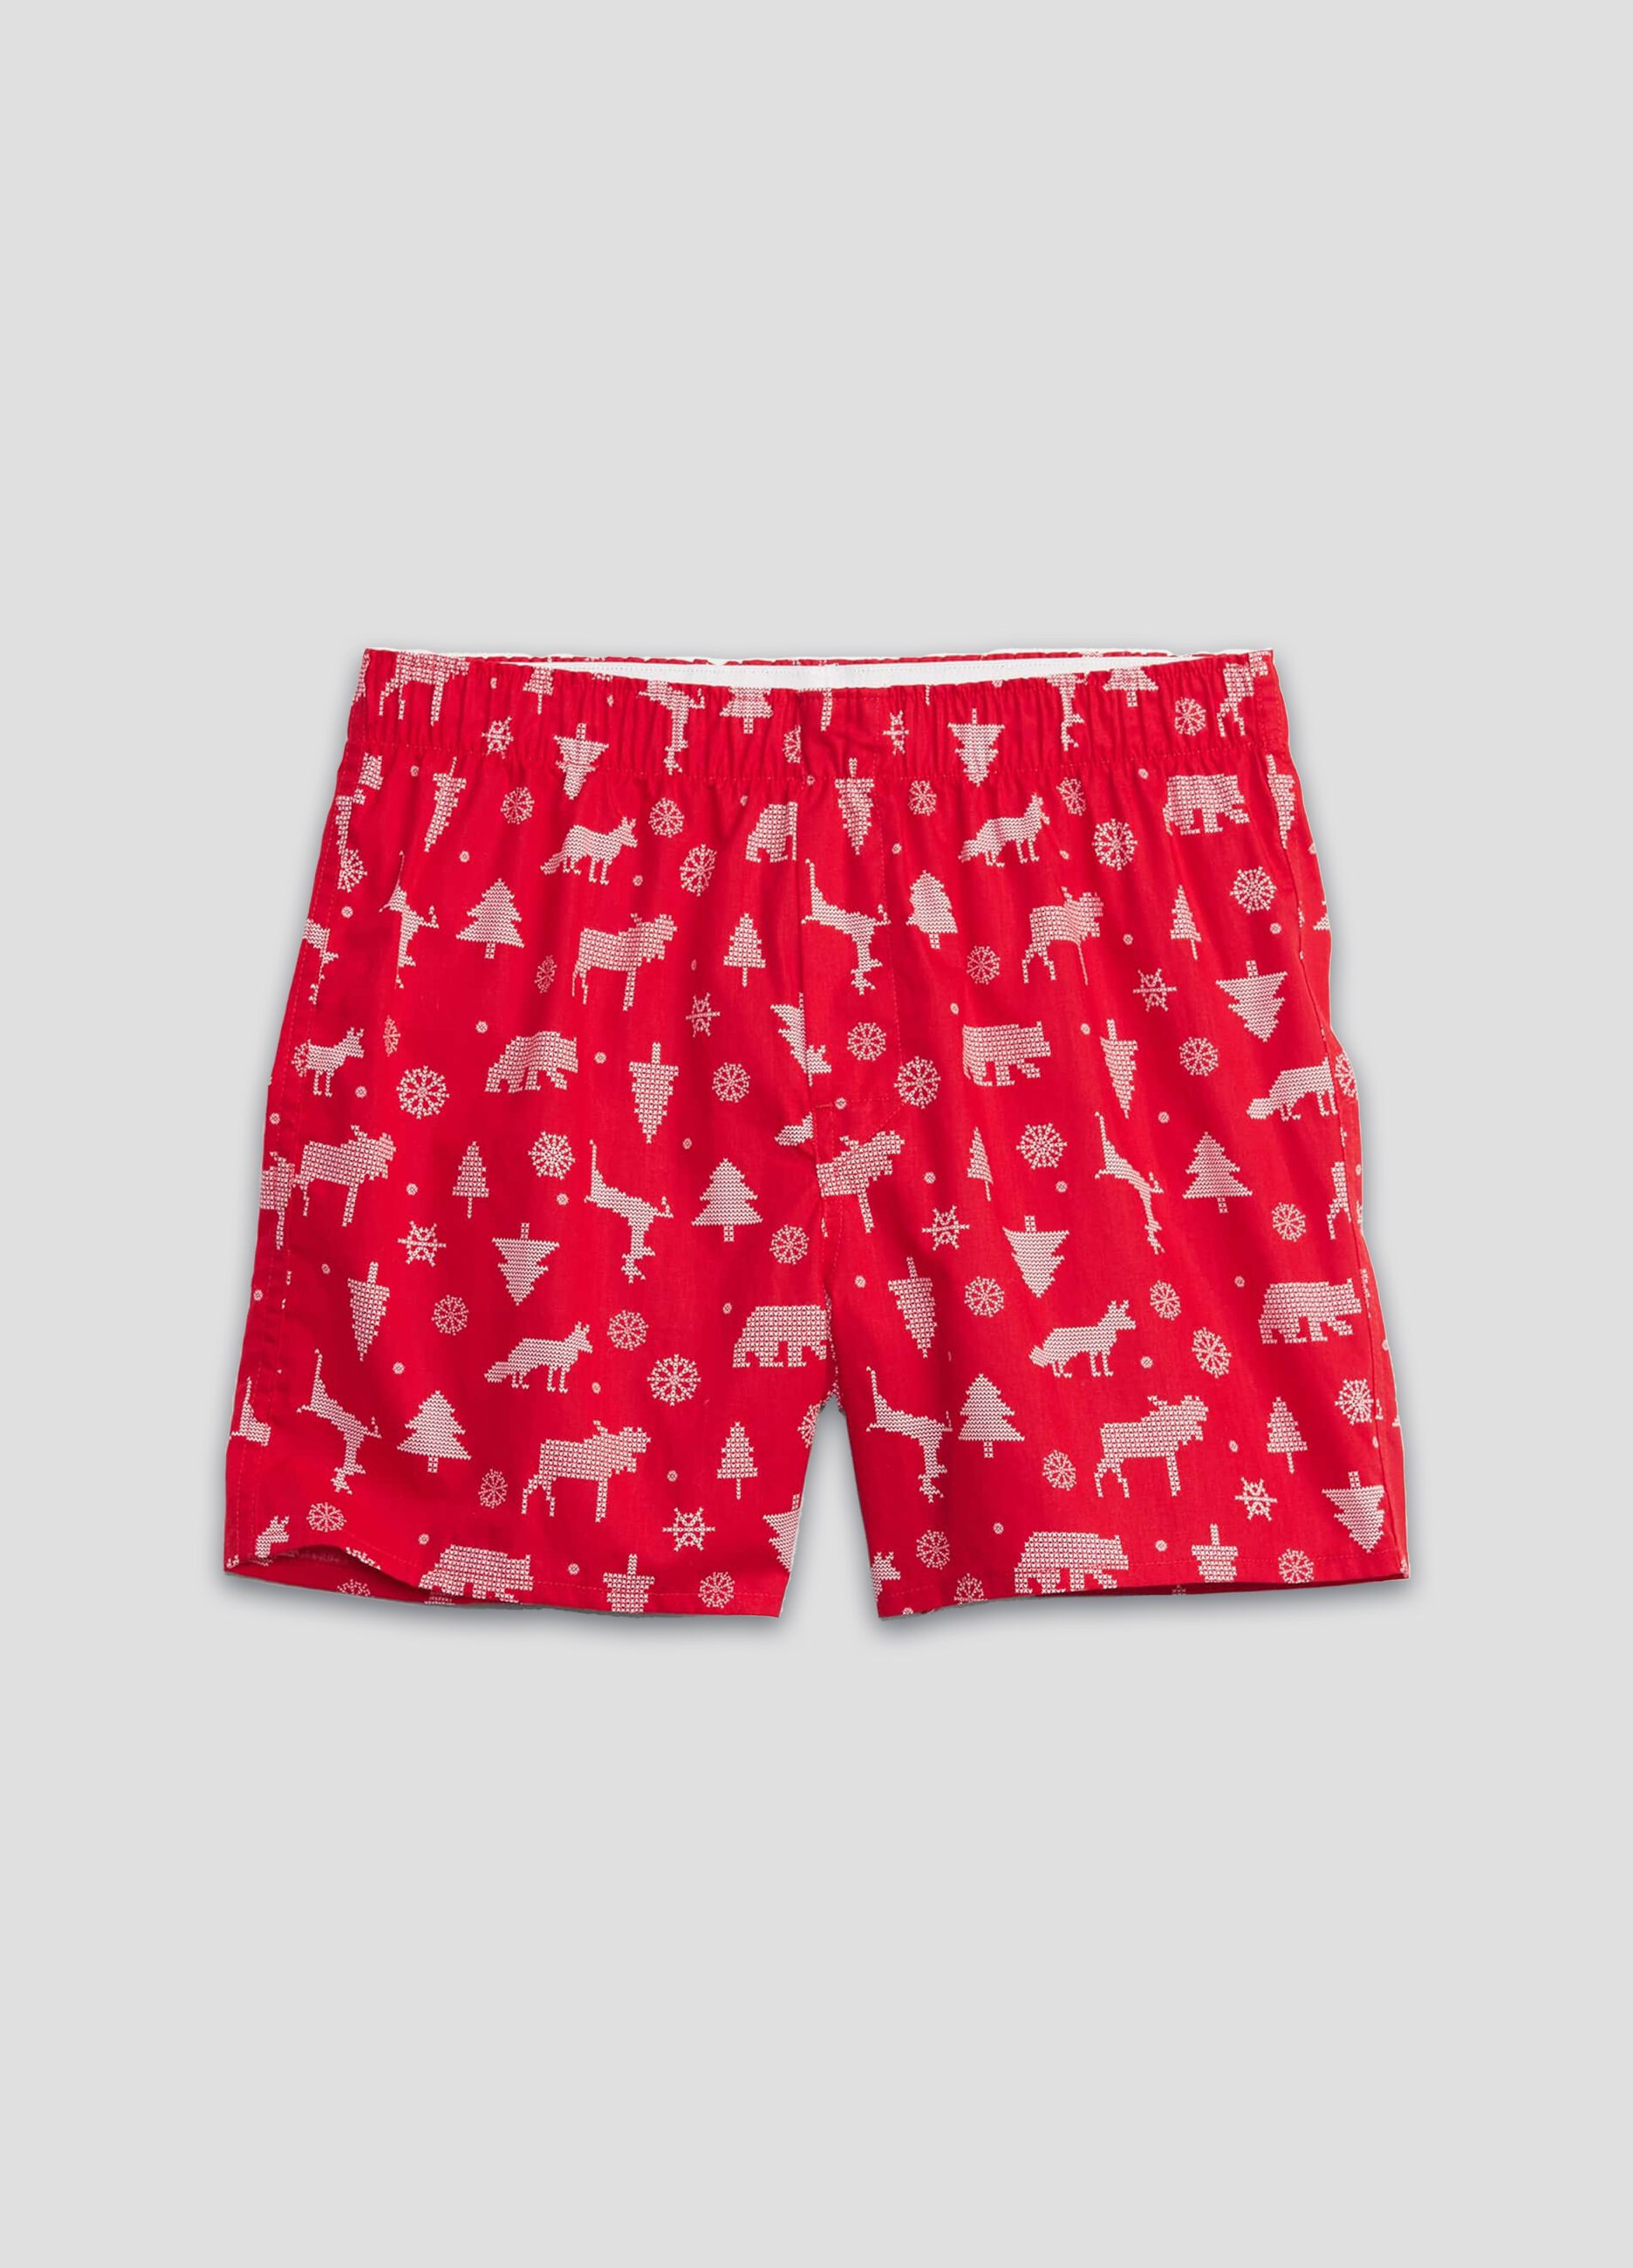 Boxer shorts in cotton with Christmas print